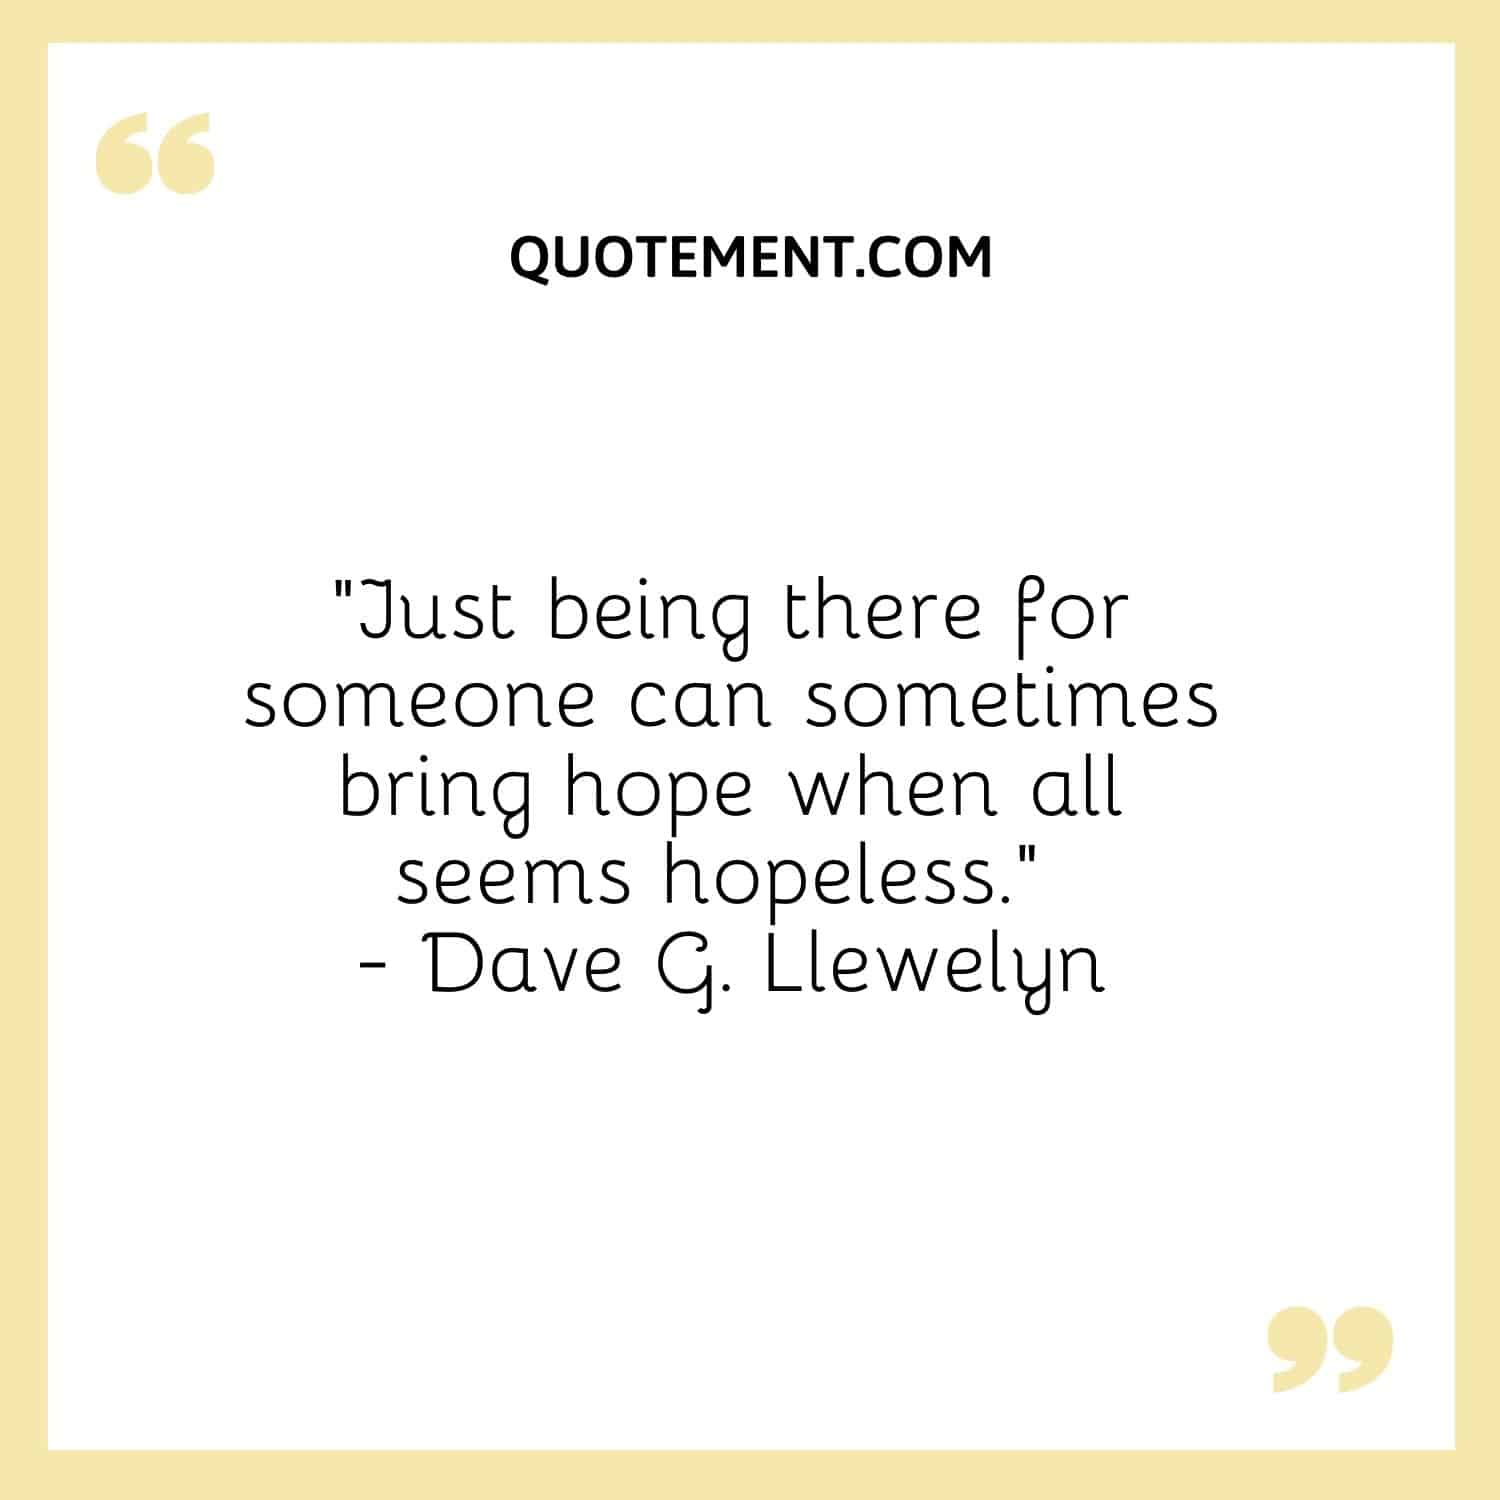 Just being there for someone can sometimes bring hope when all seems hopeless. — Dave G. Llewelyn